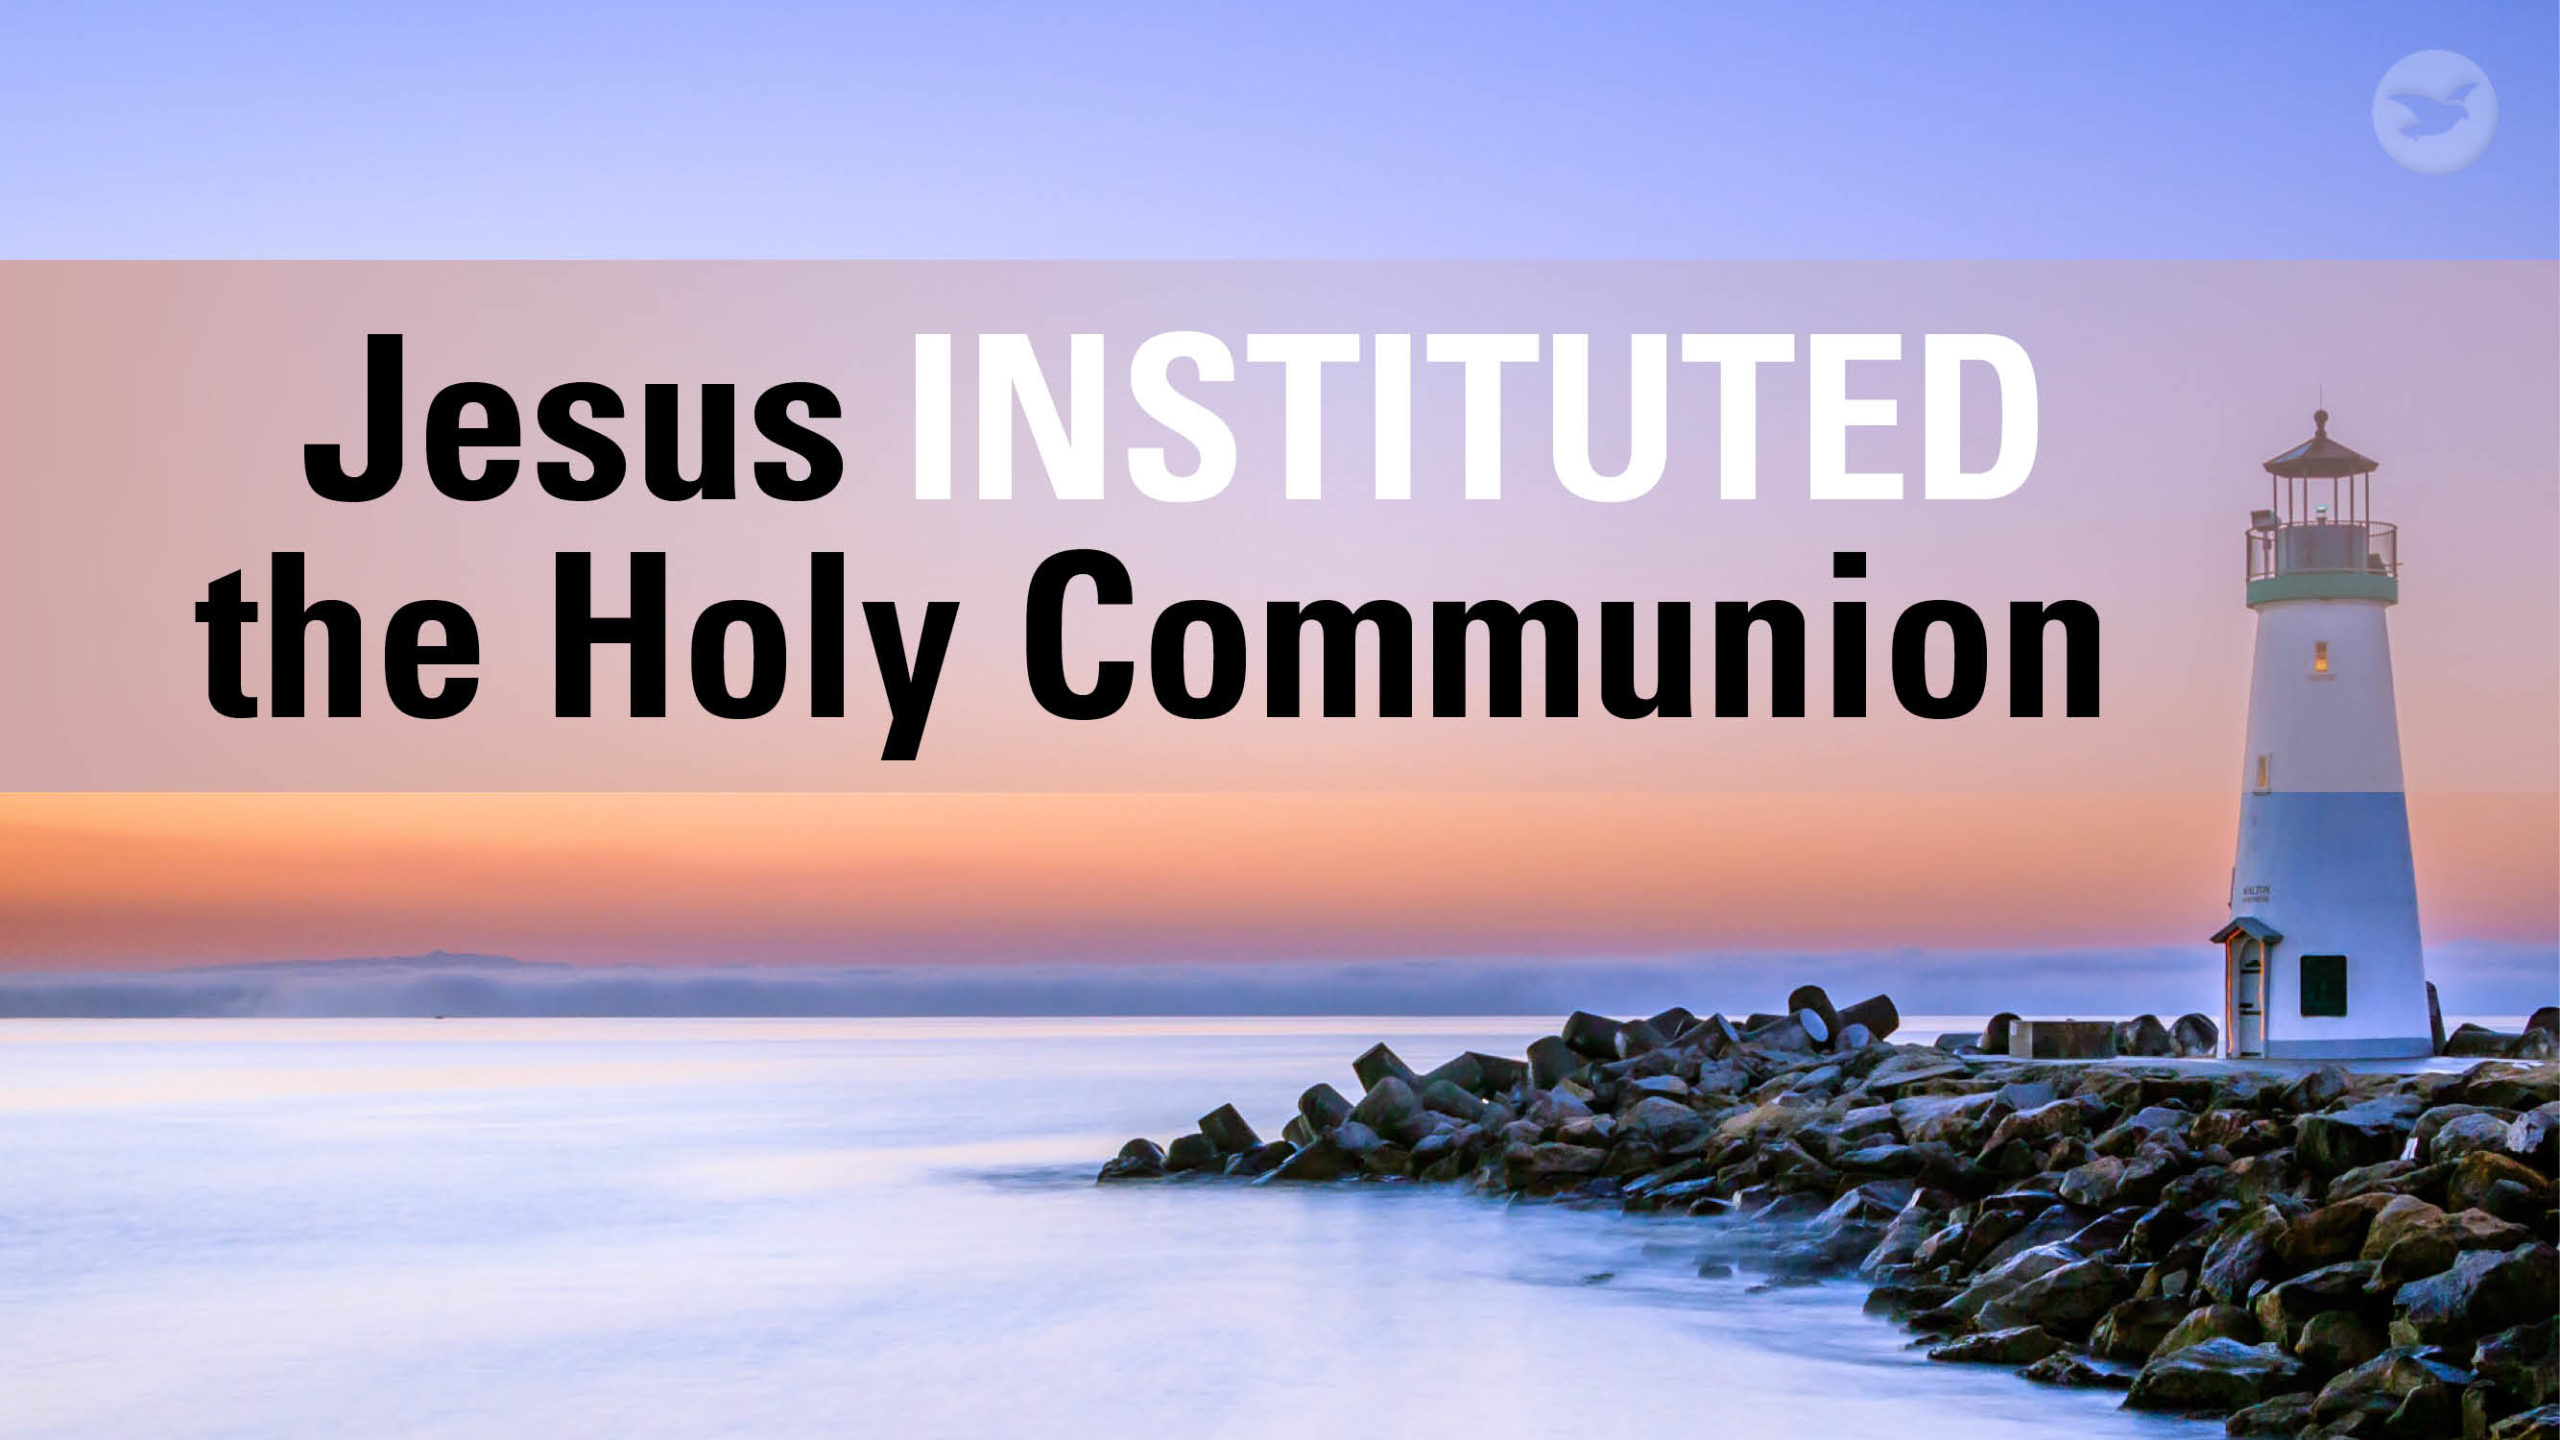 Jesus instituted the Holy Communion during the Last Supper and commanded His disciples to continue to observe the sacrament. The True Jesus Church, like the early church in the Bible, observes this sacrament in obedience to the Lord’s command.